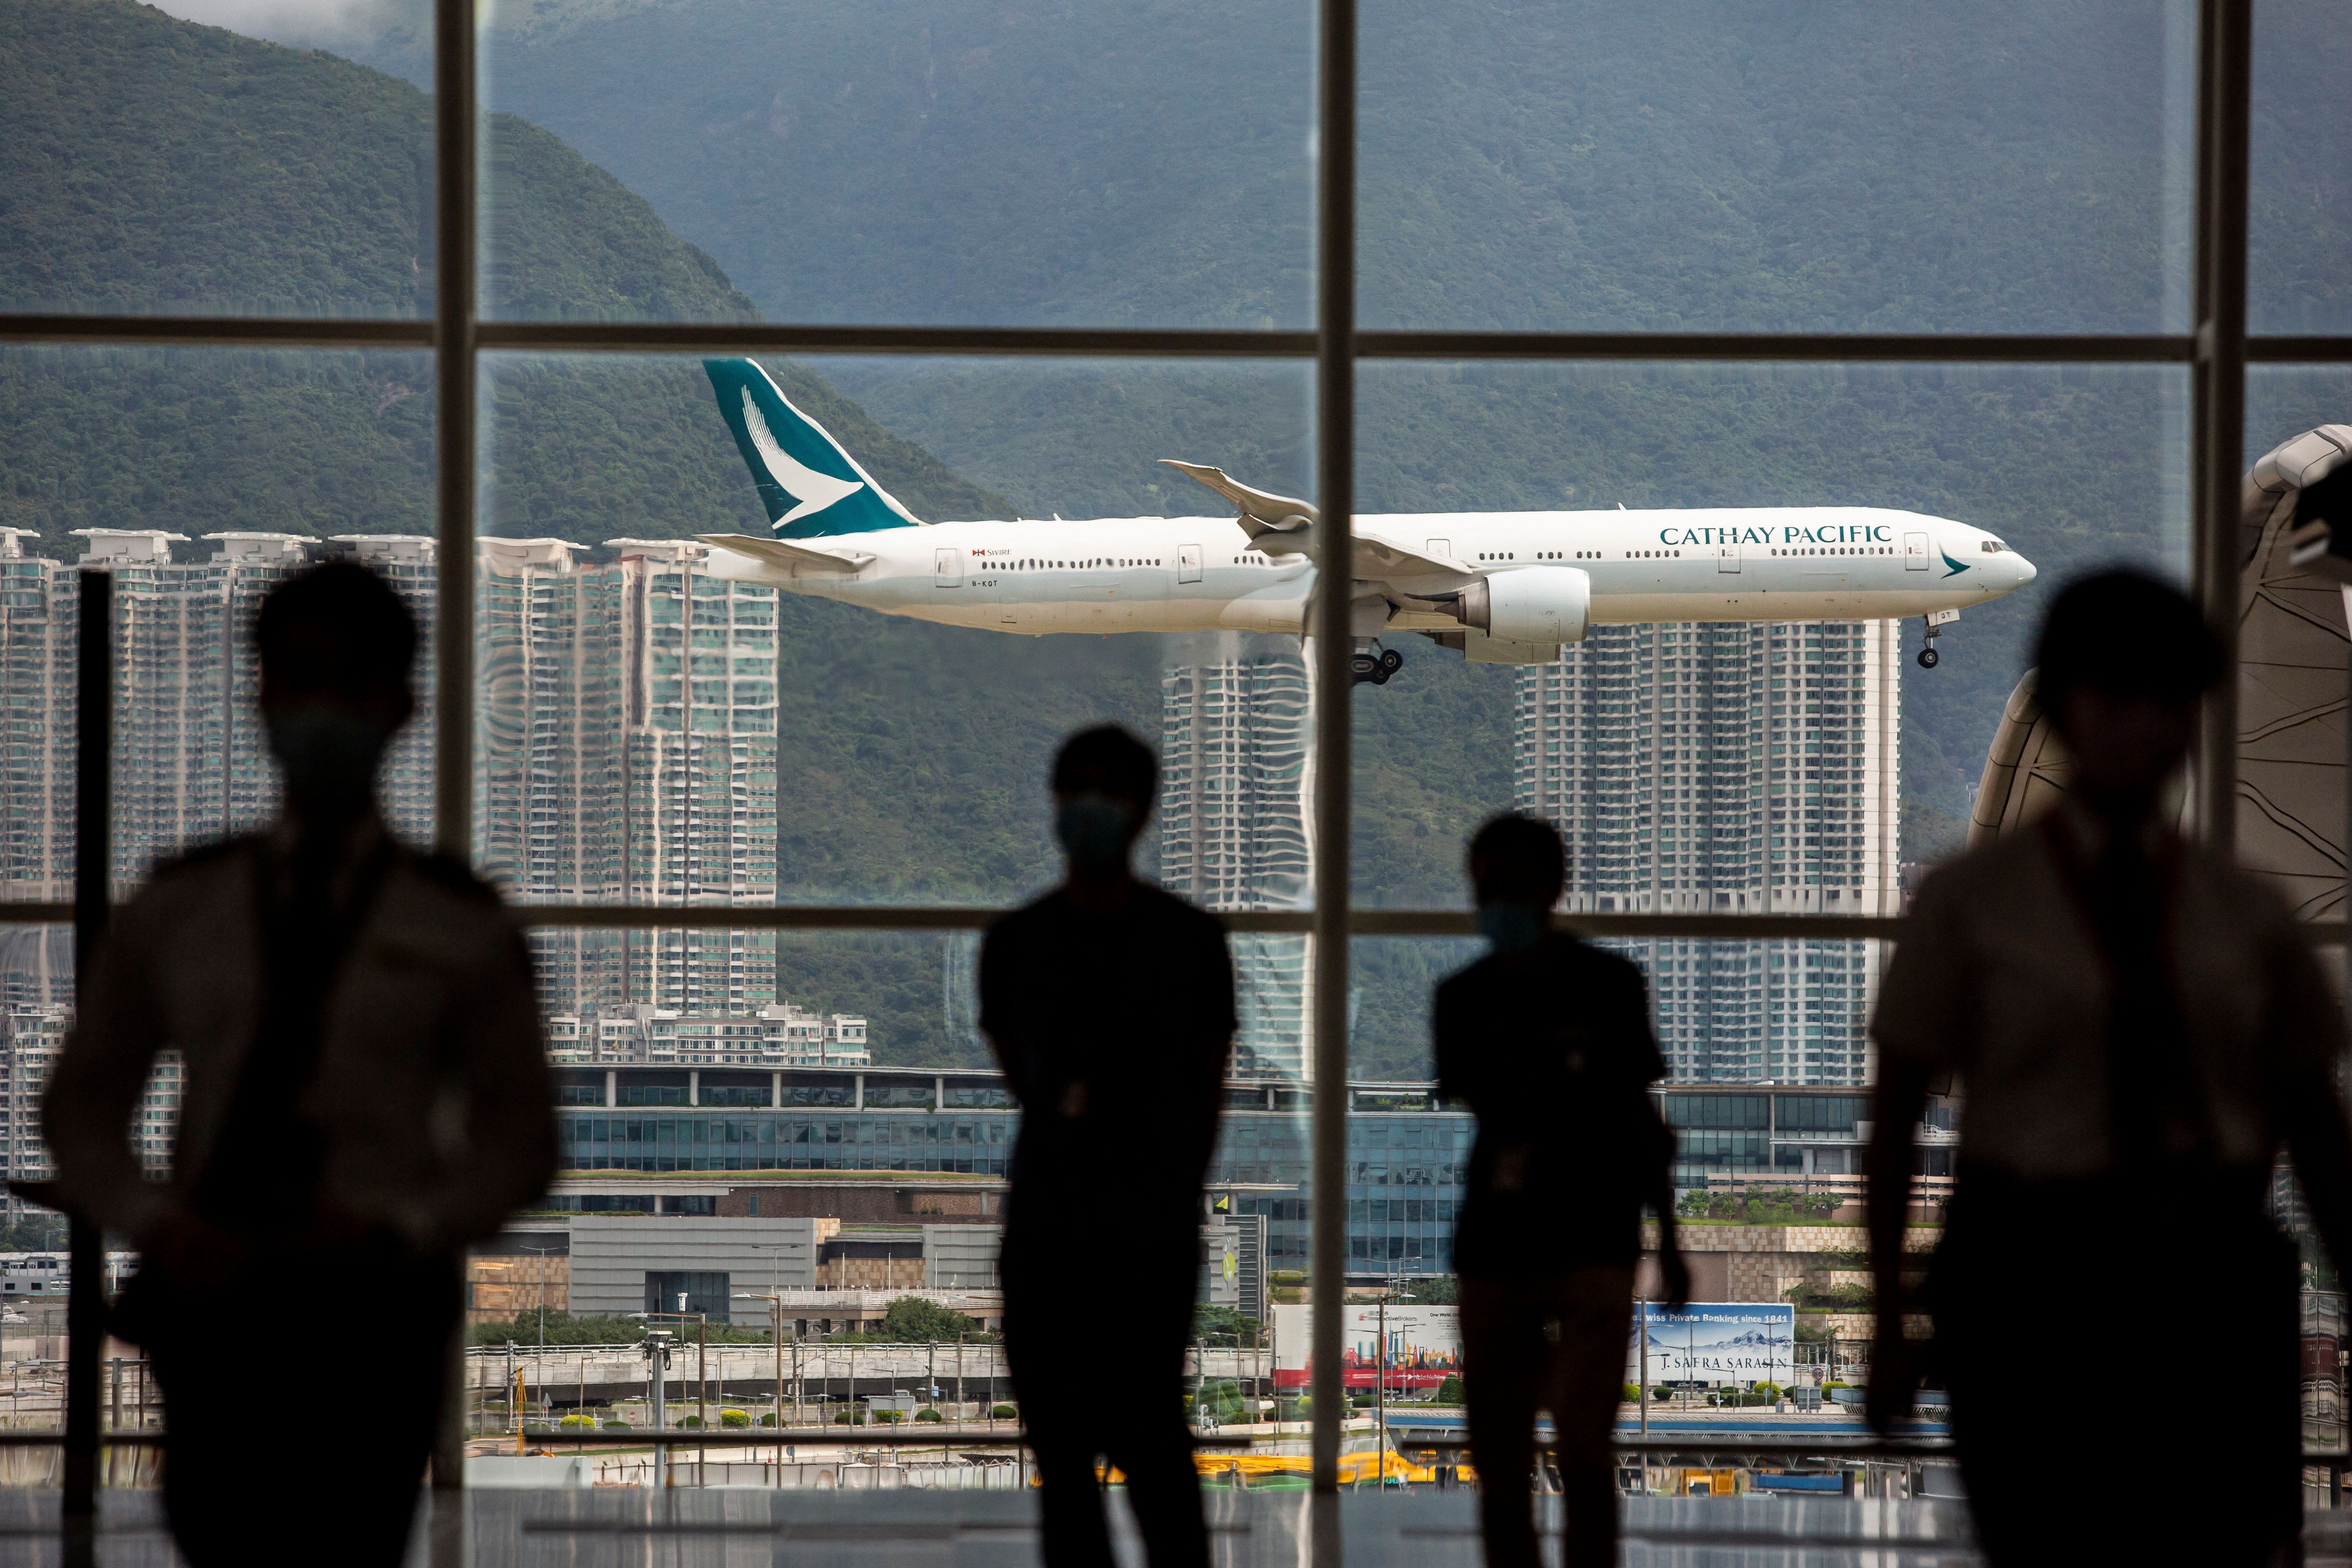 A Cathay Pacific aircraft comes in to land at Hong Kong International Airport on August 11, 2021.